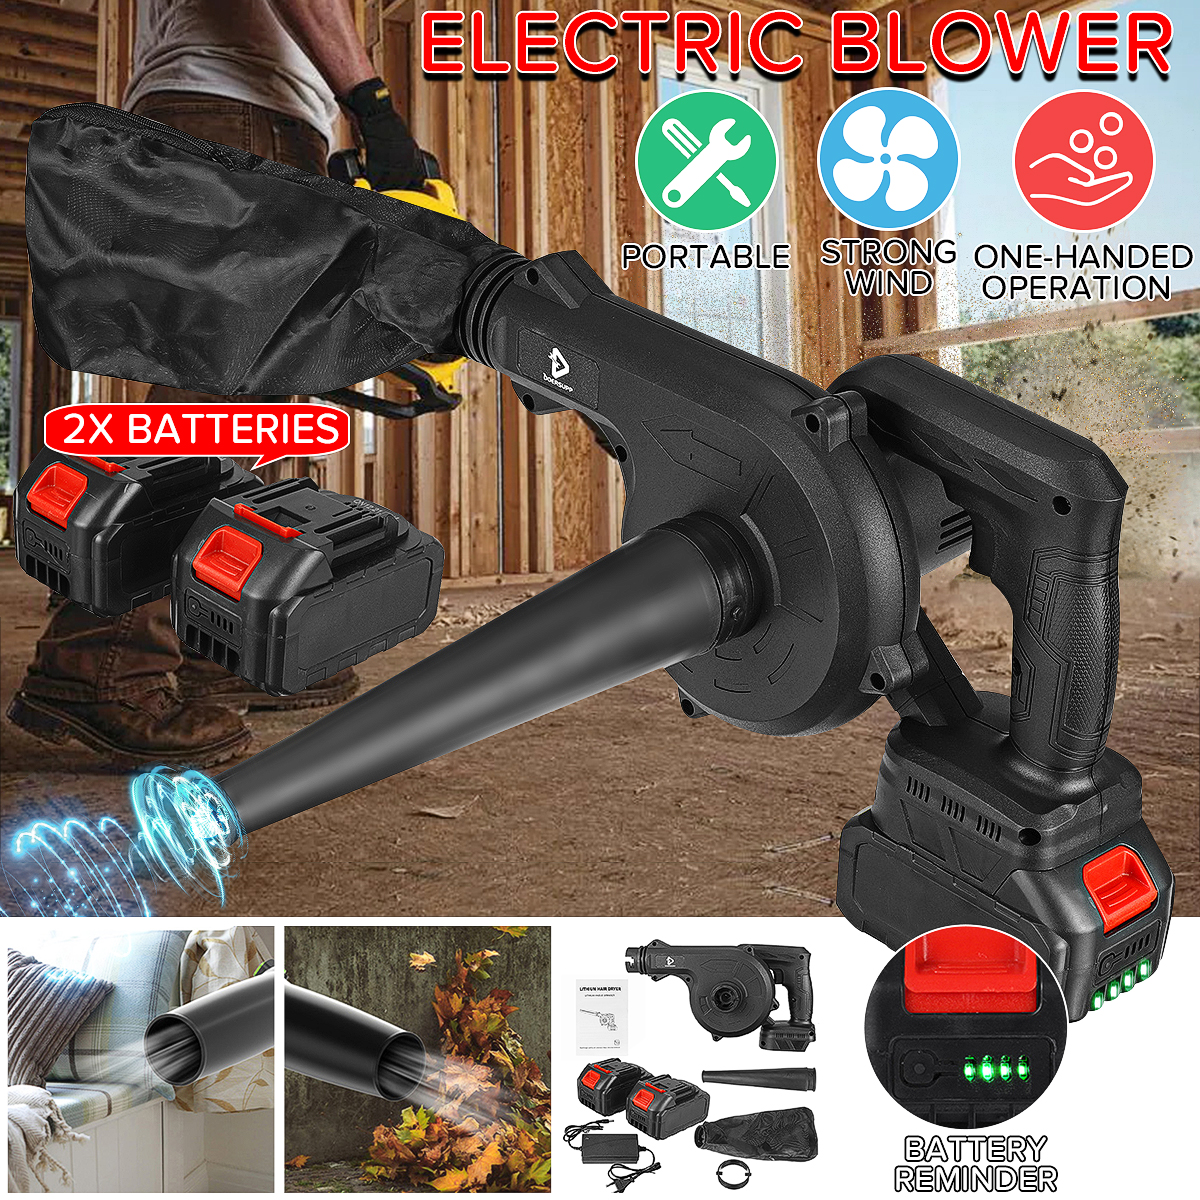 Doersupp-21V-1000W-Cordless-Electric-Air-Blower-Vacuum-Suction-Cleaning-Leaf-Blower-Computer-Dust-Co-1863319-2